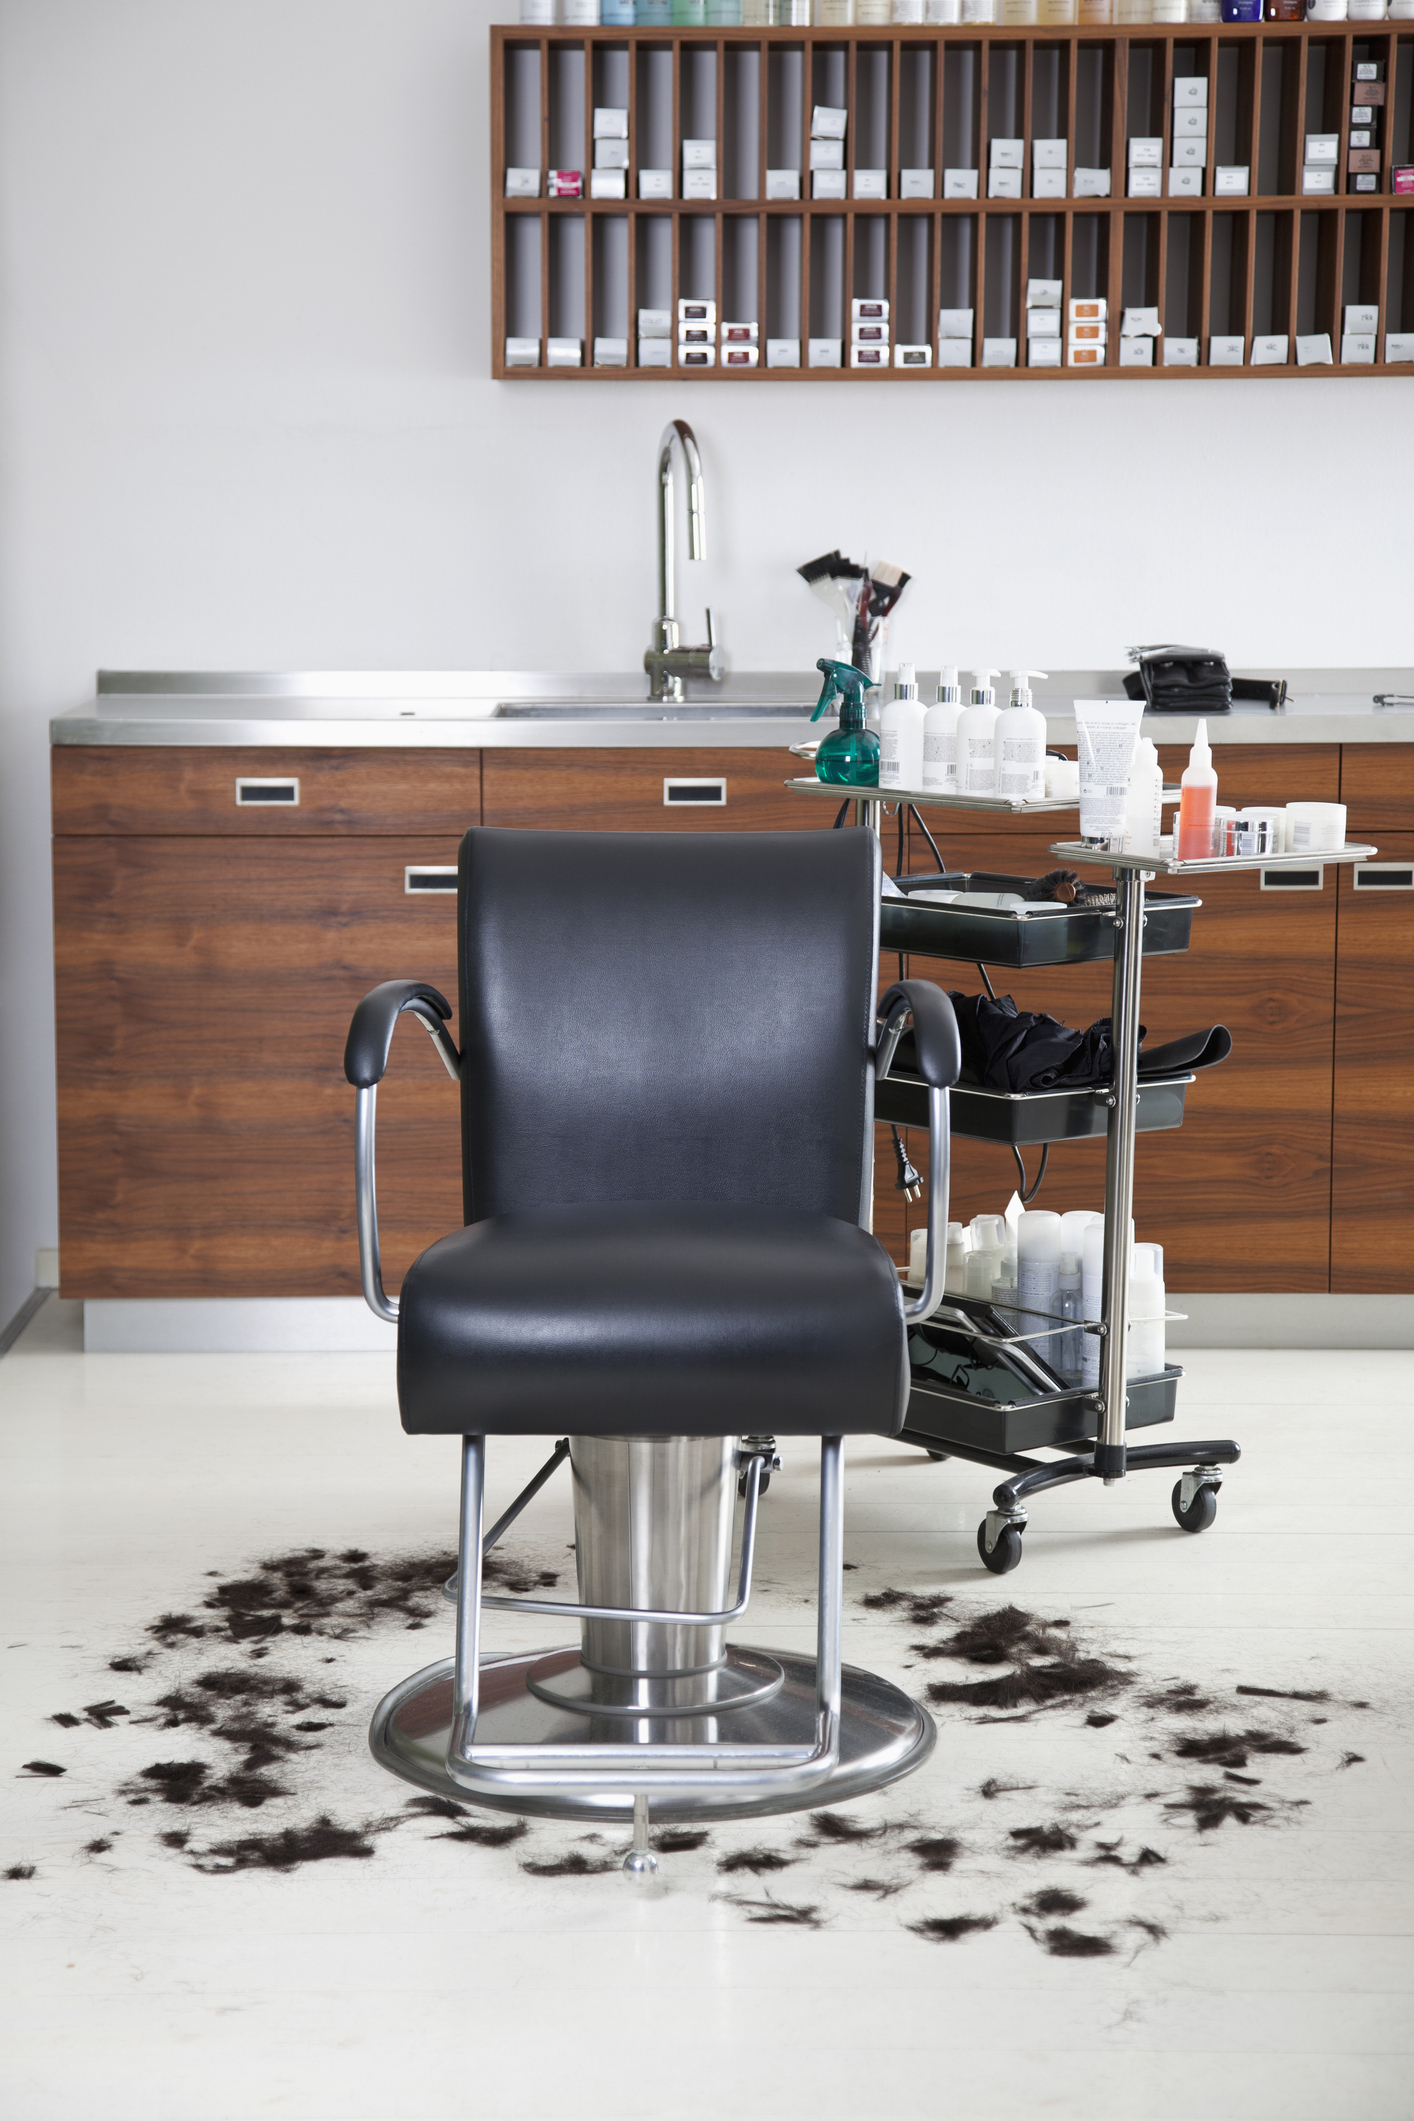 Barber chair in a salon with hair trimmings on the floor, signifying a recent haircut